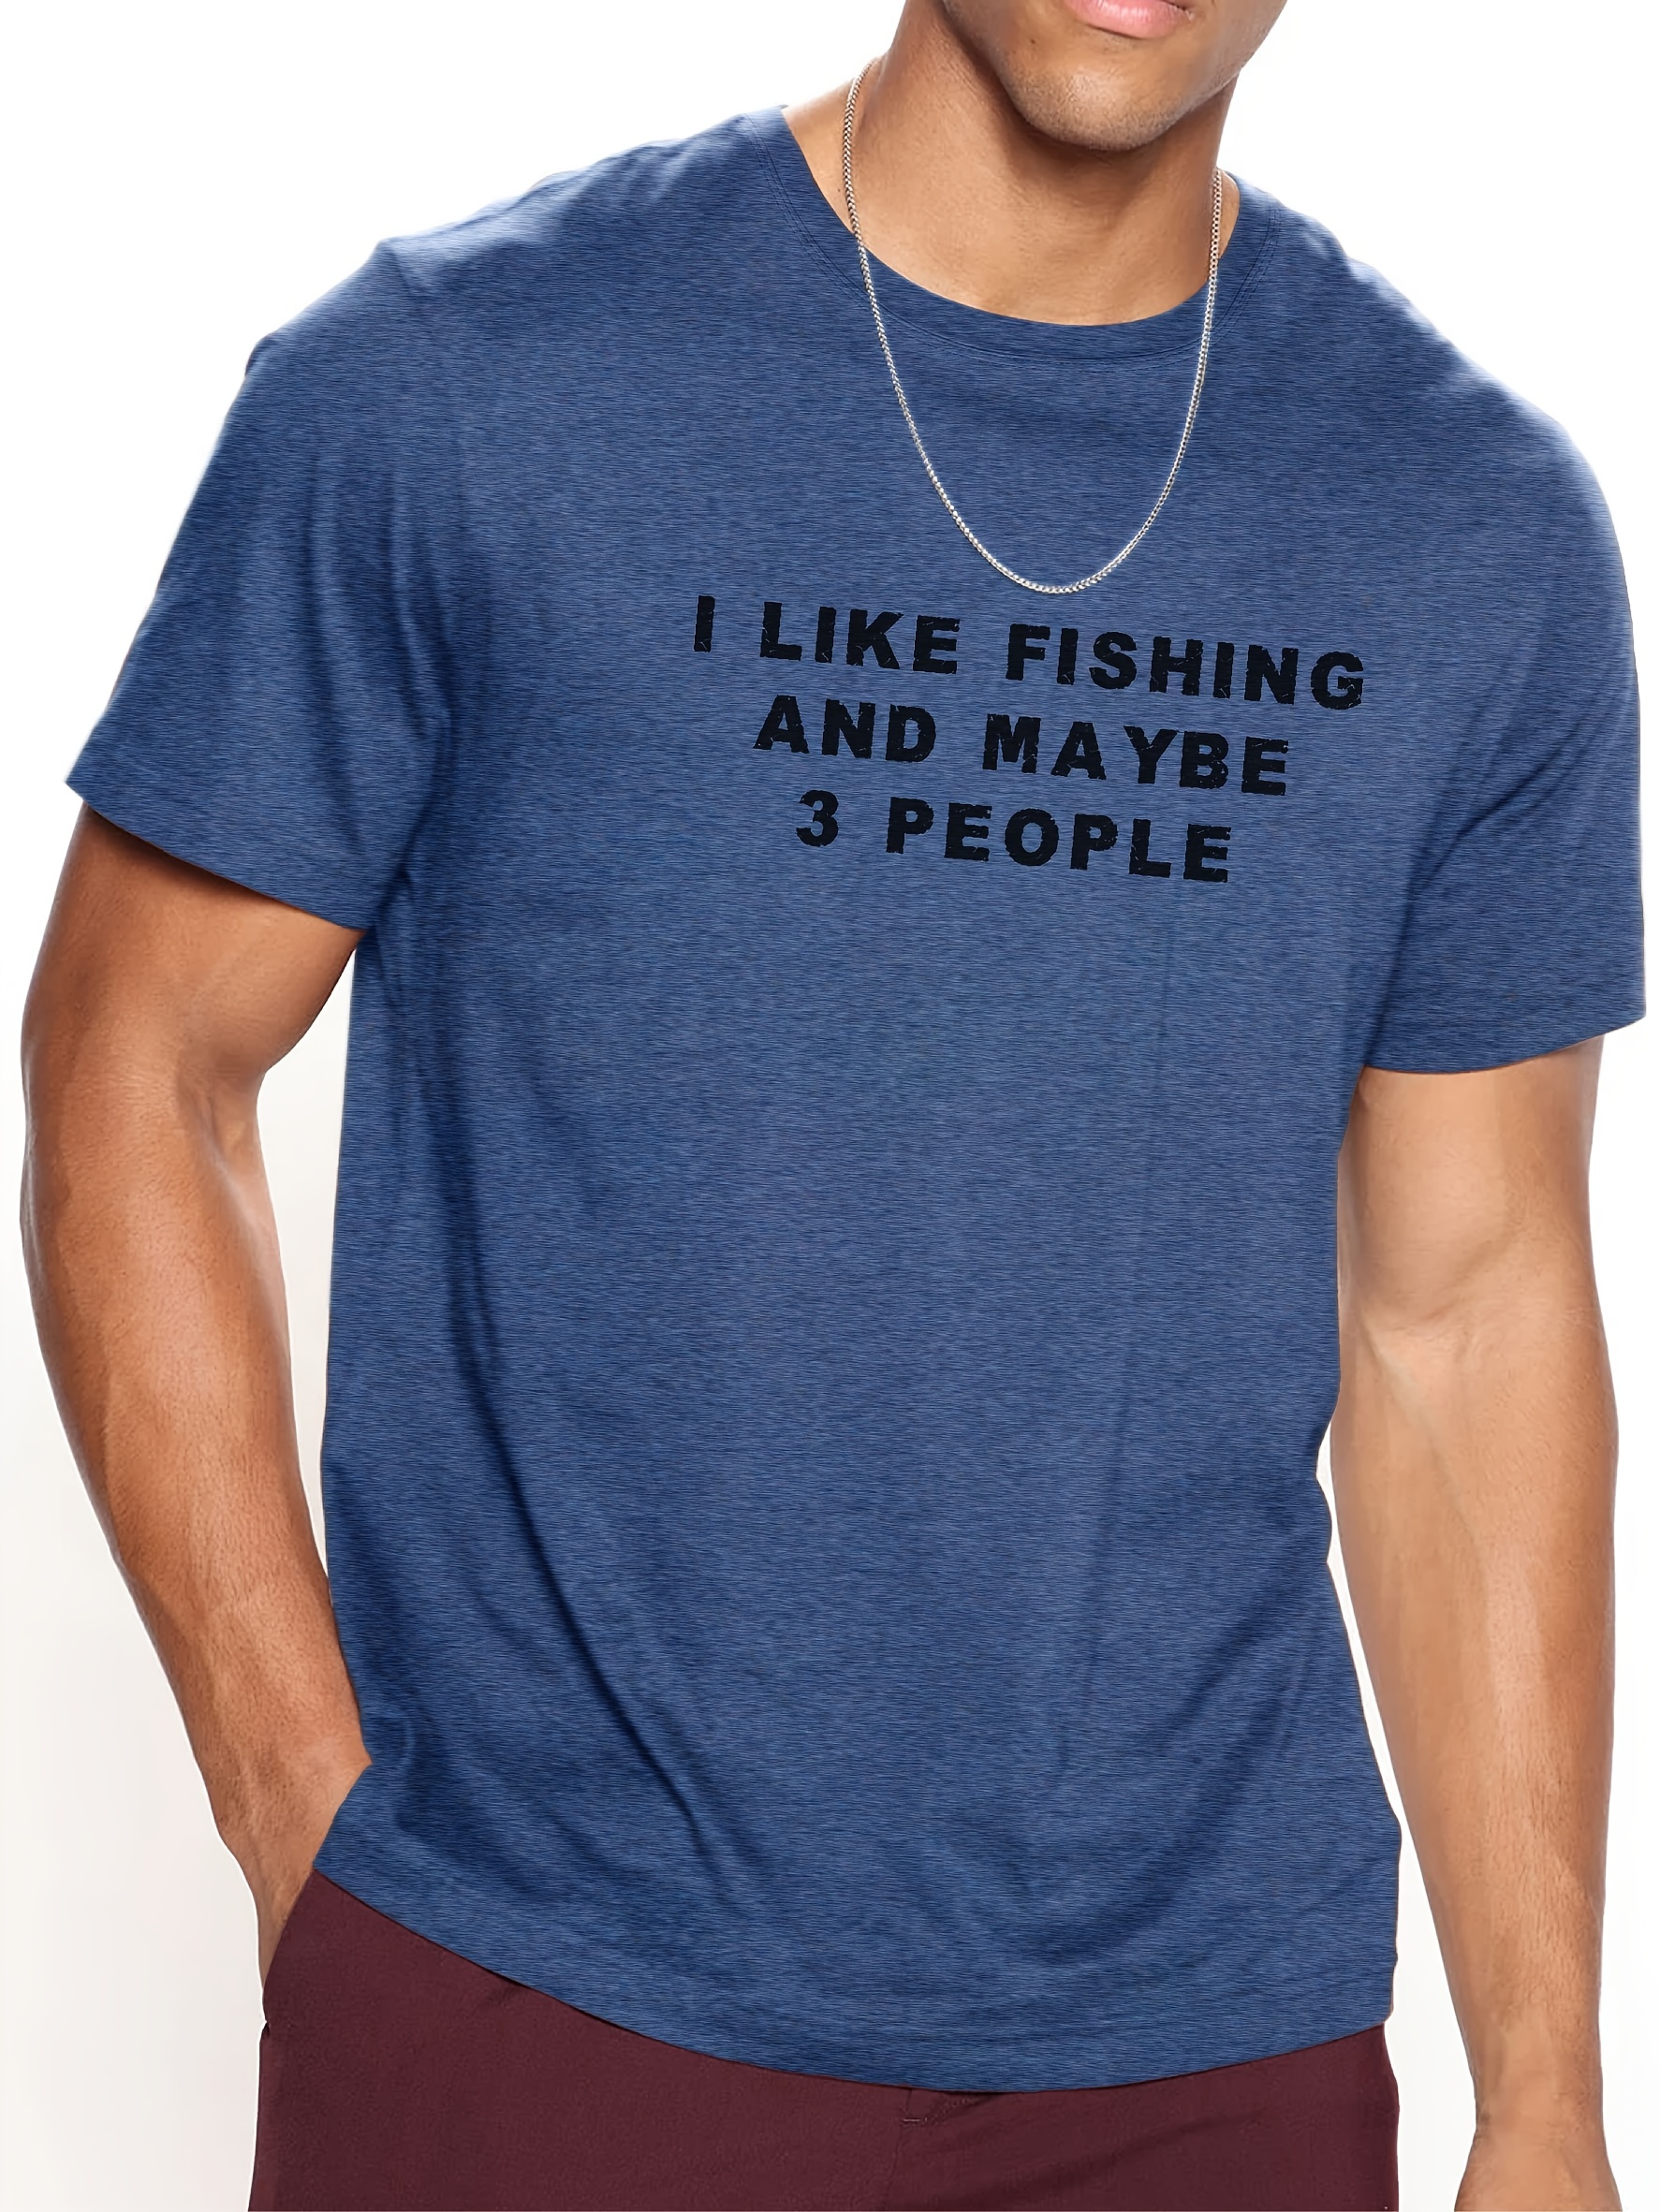 Fishing 3d Print T-shirt, Men's Casual Street Style Stretch Round